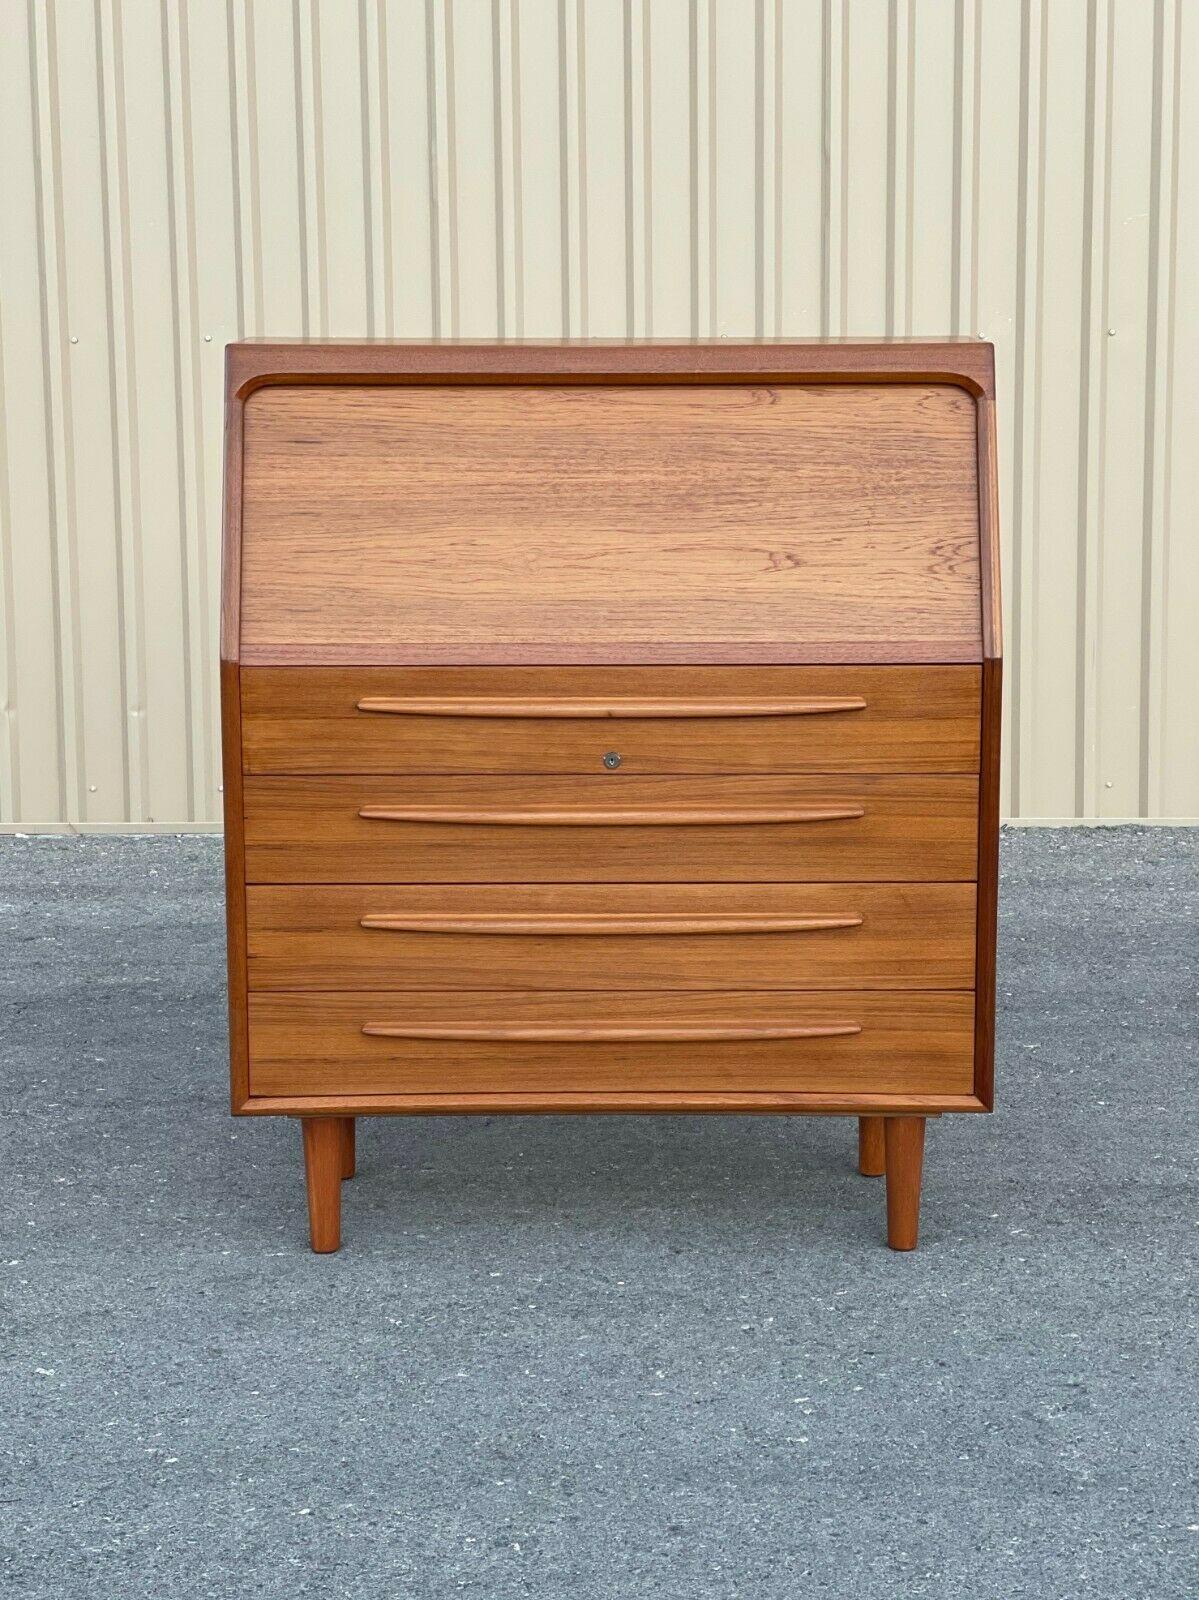 Wow!! What a beautiful and unique mid-century teak veneer tambour desk, by Bernhard Pedersen & Son, Eskilstrup, Denmark. This handsome desk having a Dual-action upper drawer, which when pulled out, simultaneously raises the tambour lid, exposing a